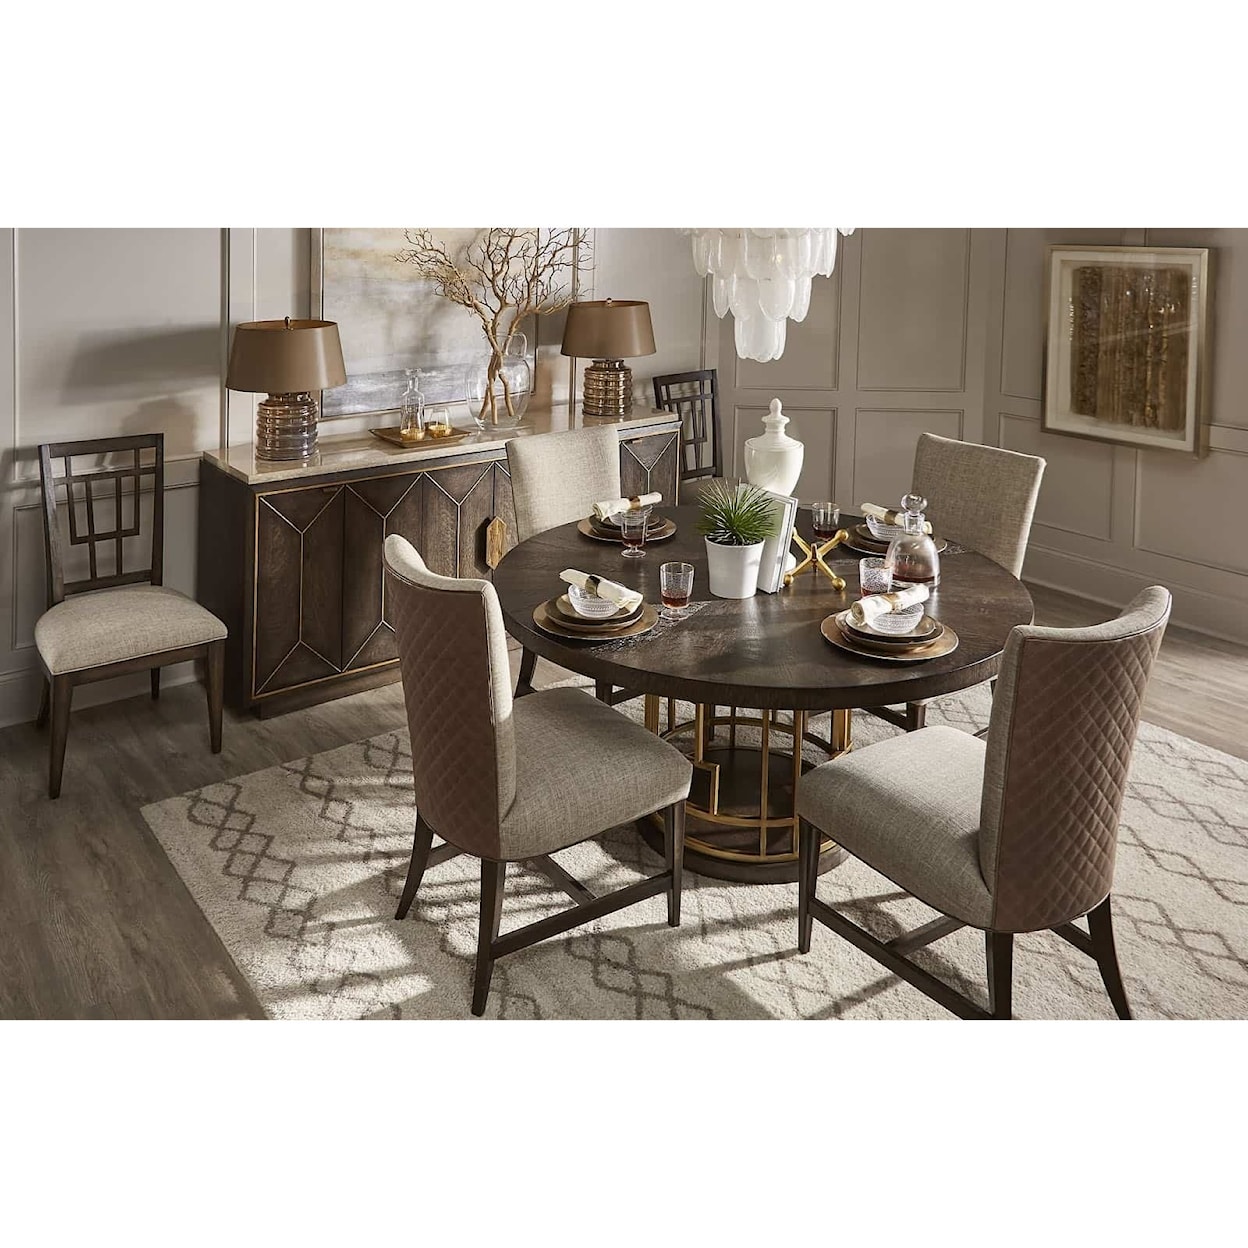 A.R.T. Furniture Inc WoodWright  Casual Dining Room Group